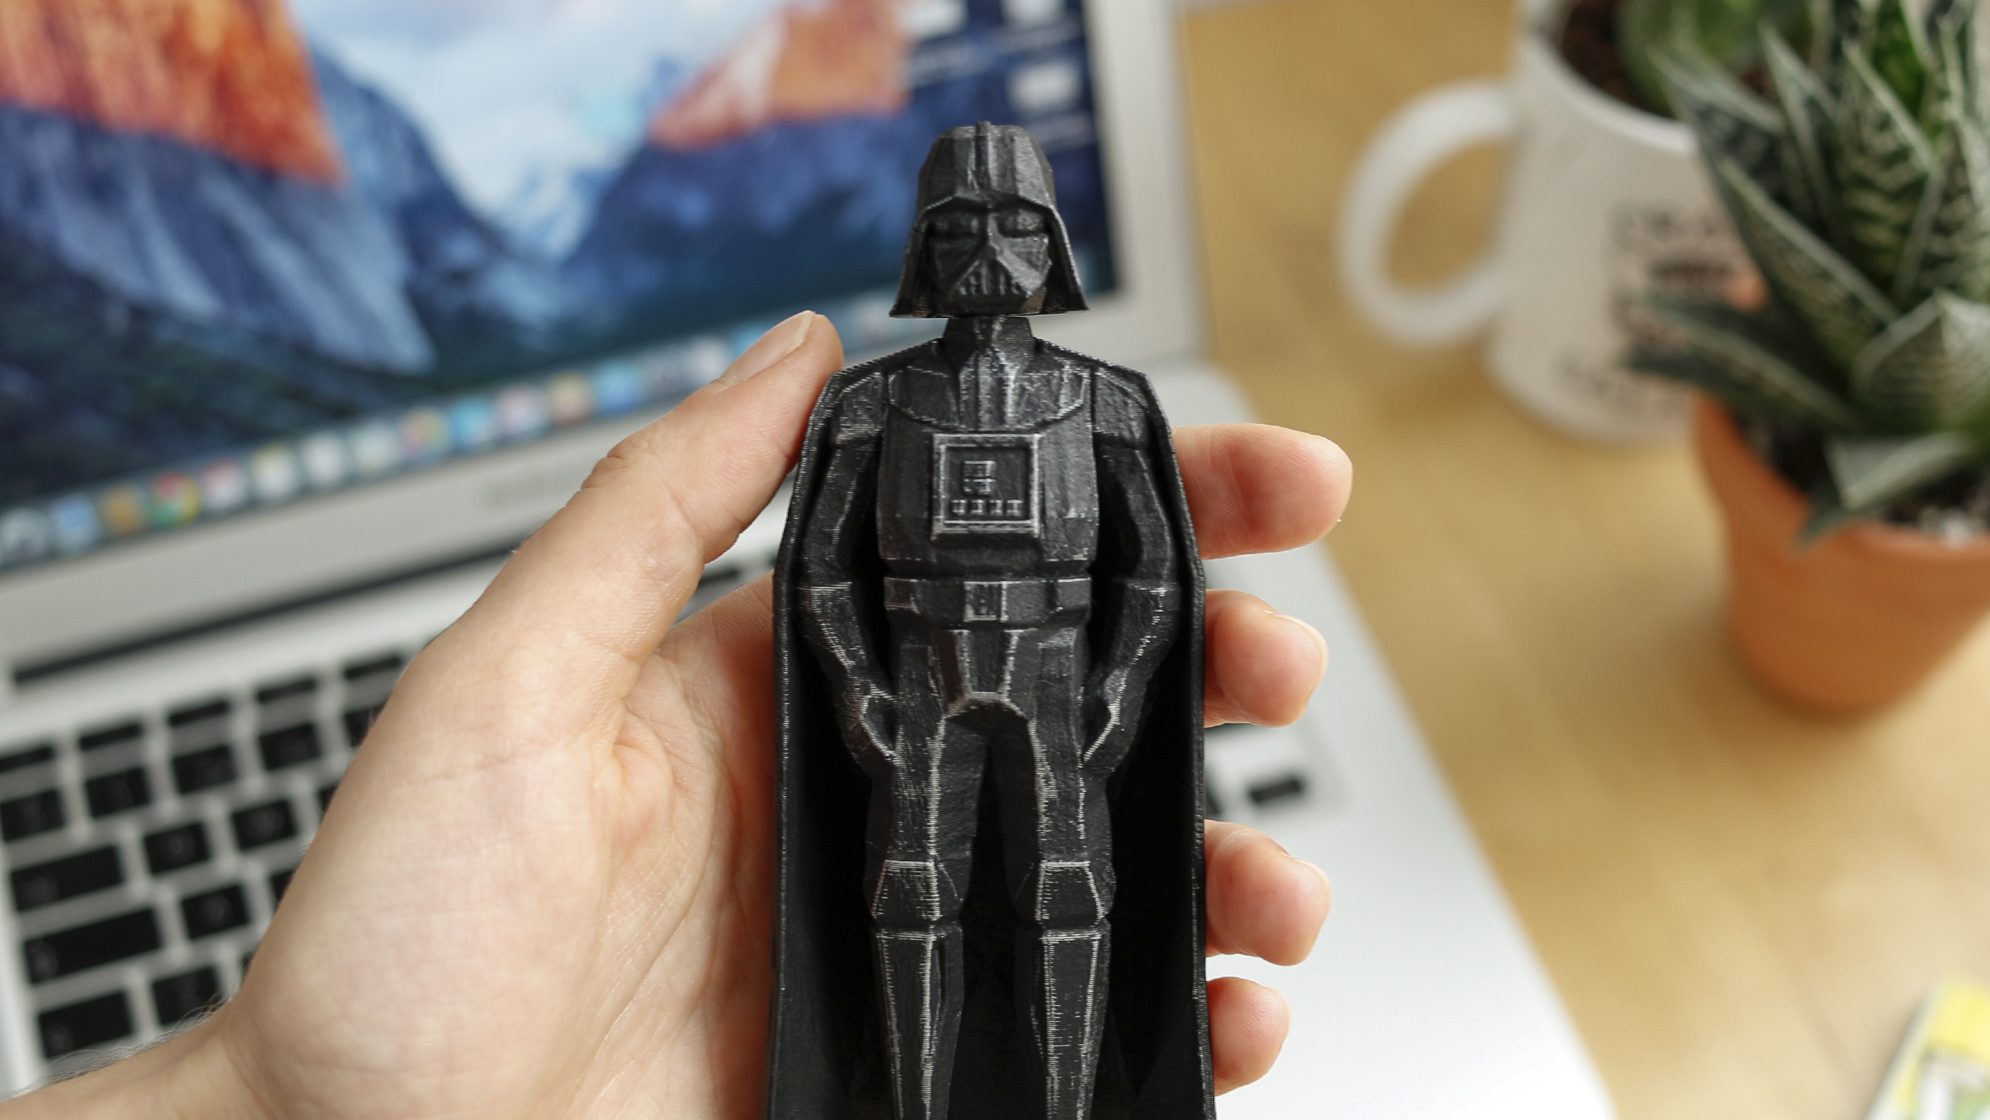 These 3D printed models are perfect for every Star Wars fan!